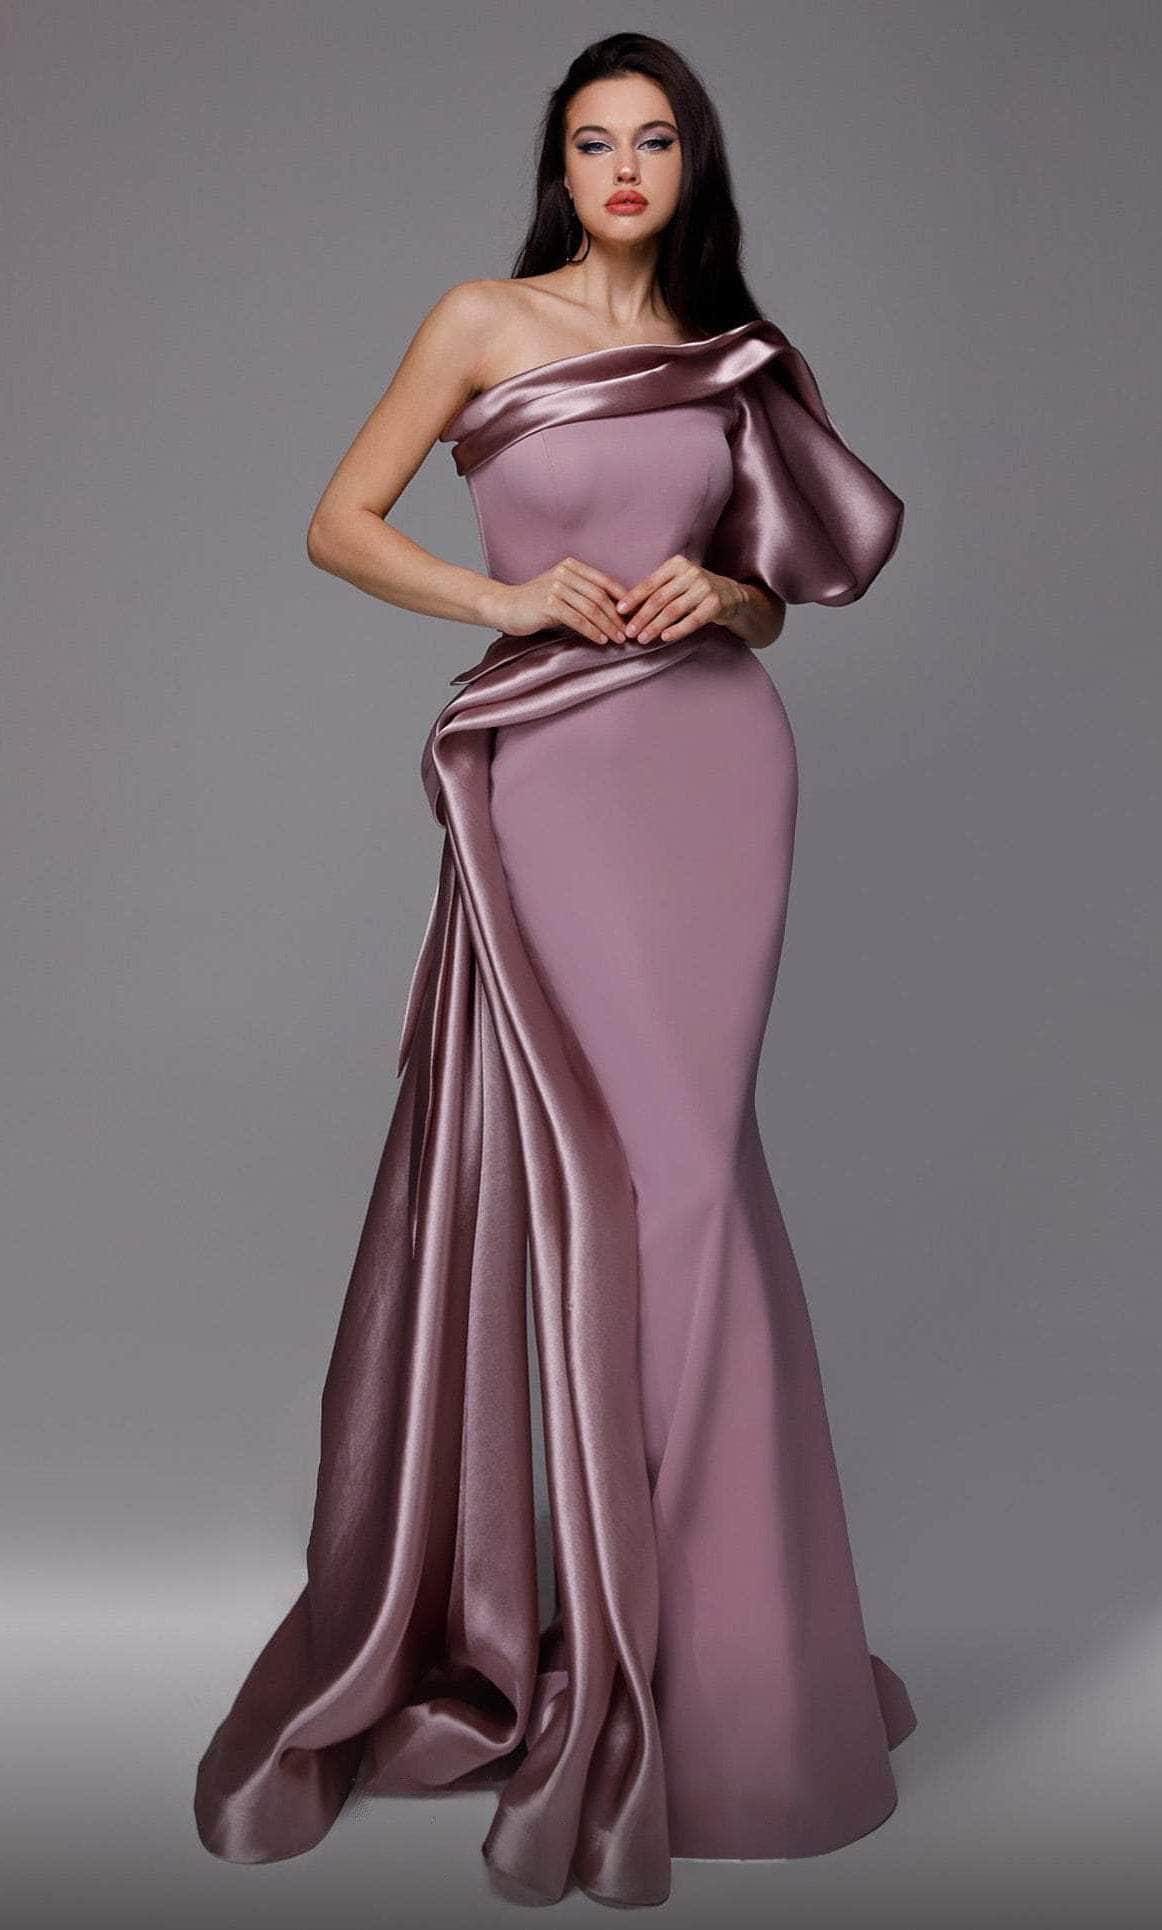 MNM COUTURE 2722 - Puffed Sleeve Asymmetric Evening Gown Special Occasion Dress 4 / Purple